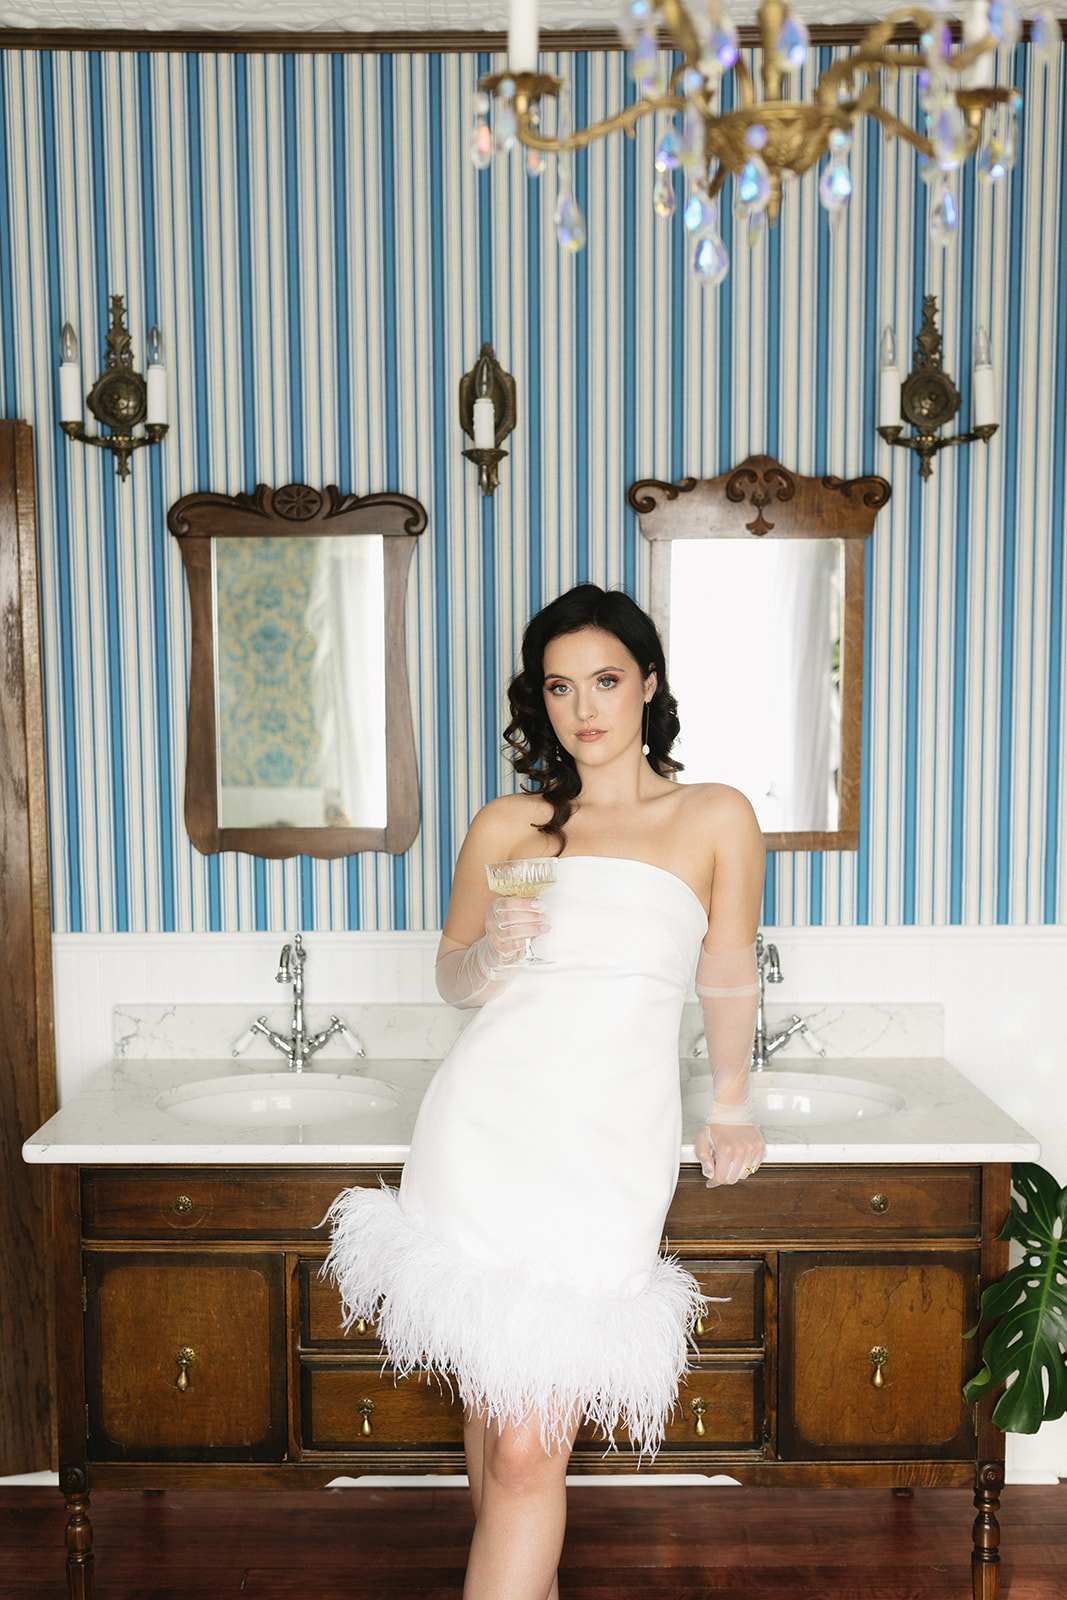 Fashion-forward bride leaning on bathroom counter wearing trendy feather-trimmed bridal gown. Morning-of Bridal Inspiration with Modern Style & Chic Getting Ready Photos.